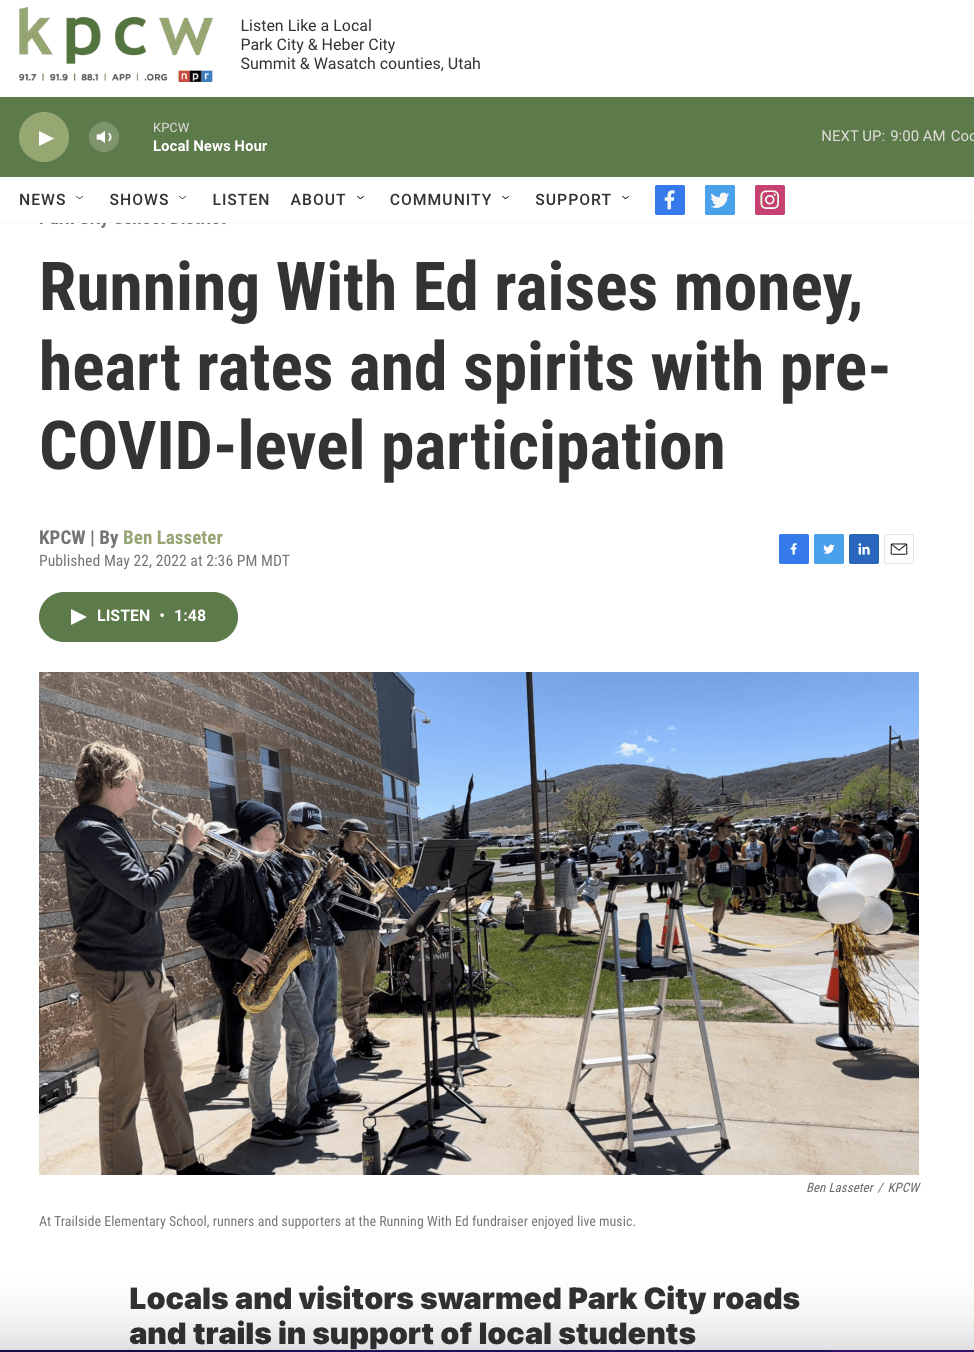 Running With Ed Raises Money, Heart Rates and Spirits with Pre-COVID-Level Participation